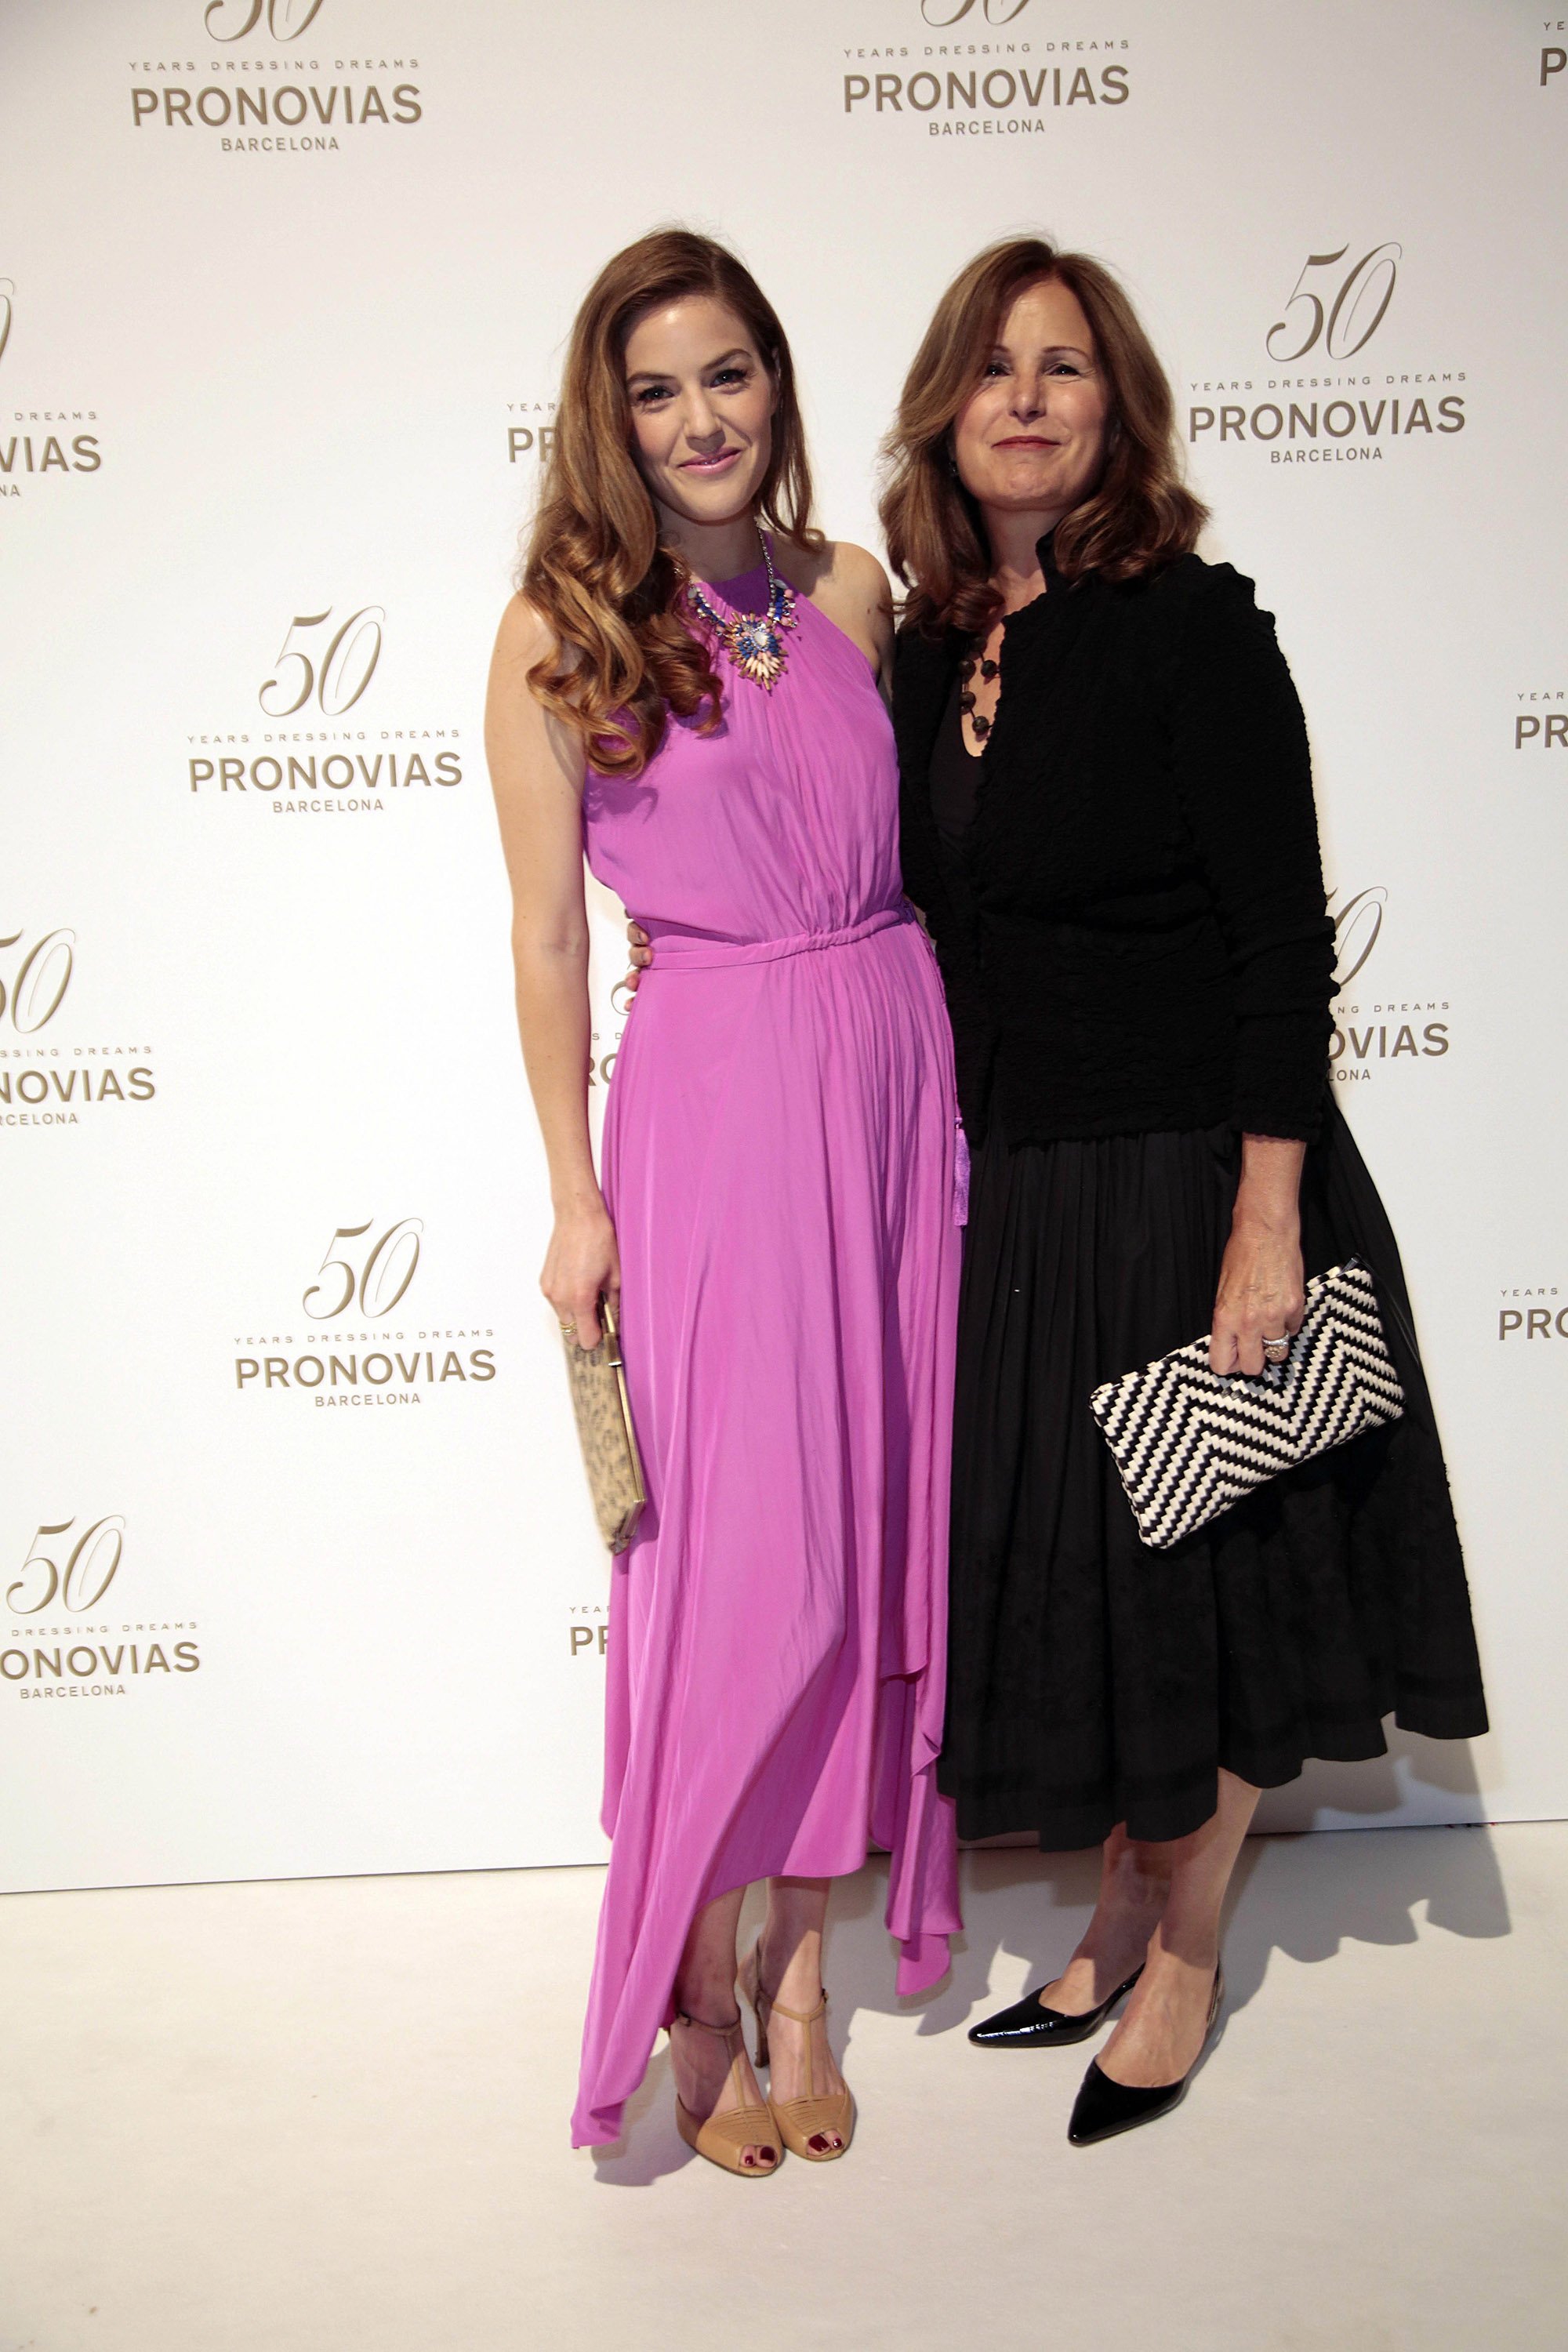  Lily Costner and Cindy Silva at a photocall for the Pronovia's 50th anniversary bridal fashion show during 'Barcelona Bridal Week'on May 9, 2014, in Barcelona, Spain. | Source: Getty Images